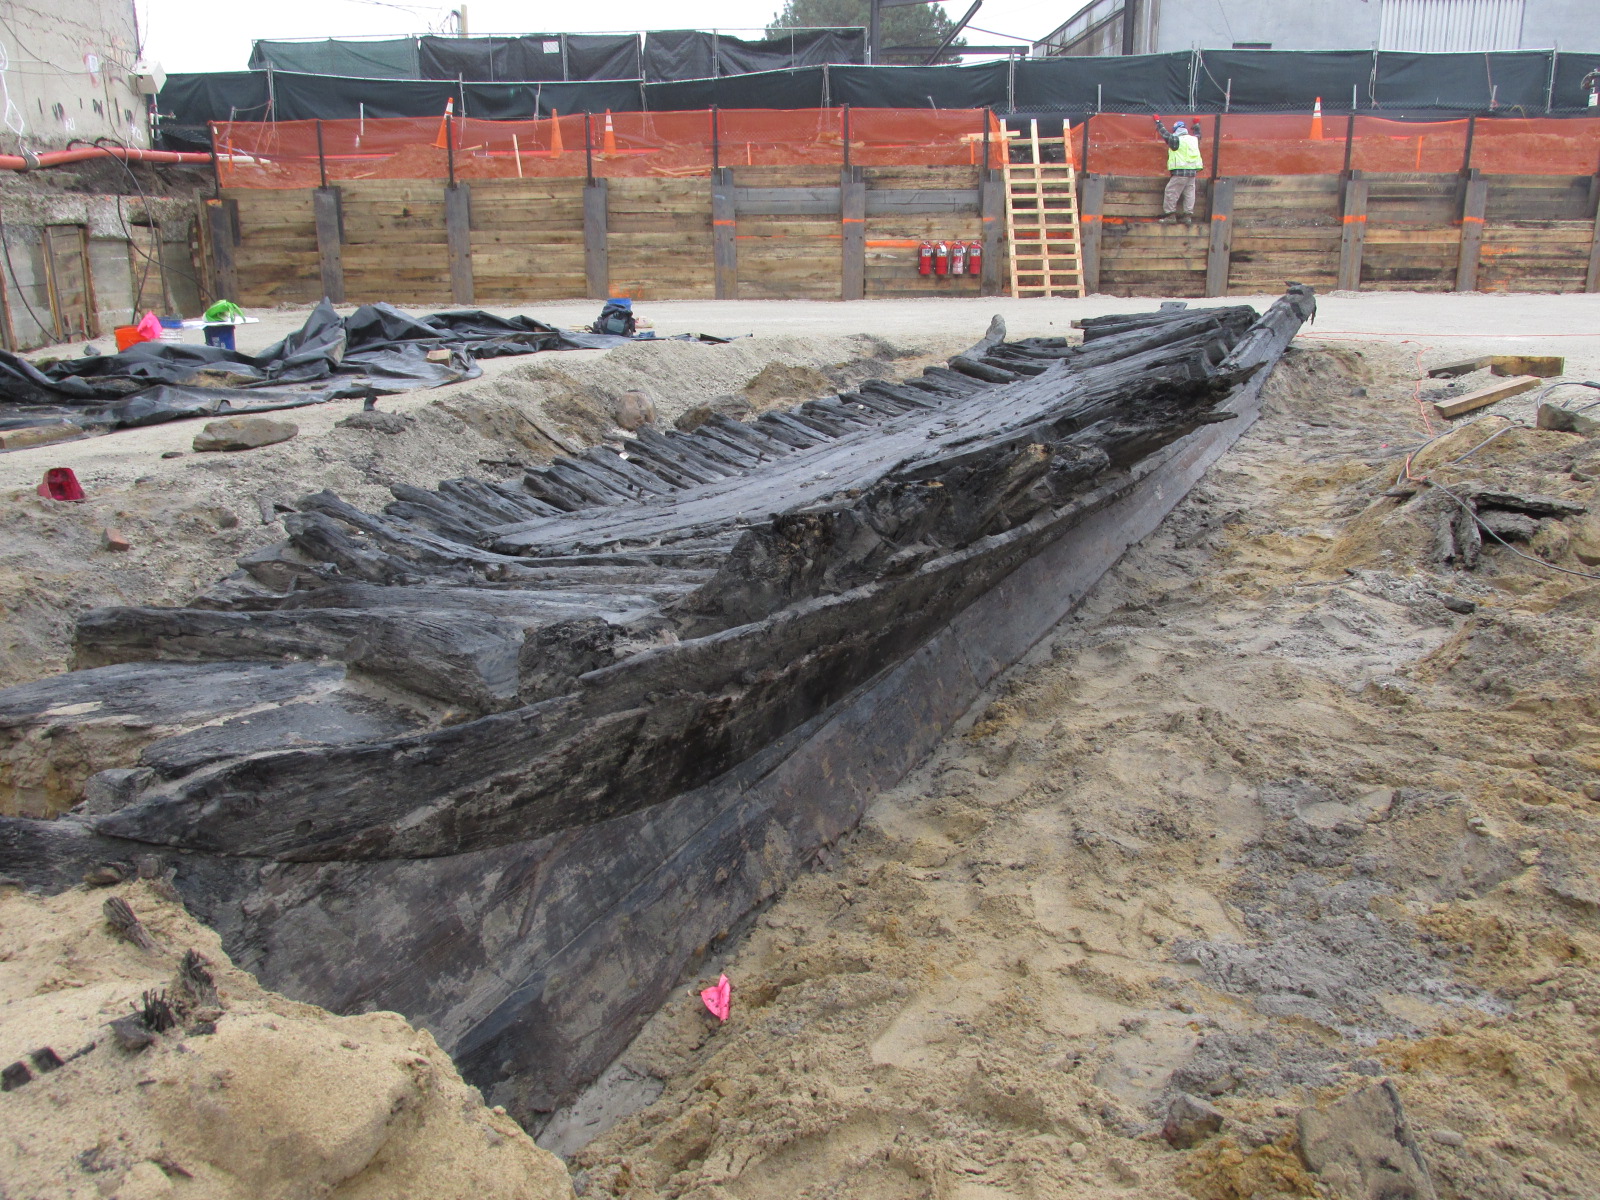   Our archeologists uncovered the port side of an 18th-century ship, including ceiling planks, framing, keel, external hull planking, deadwood and parts of the stern post.    